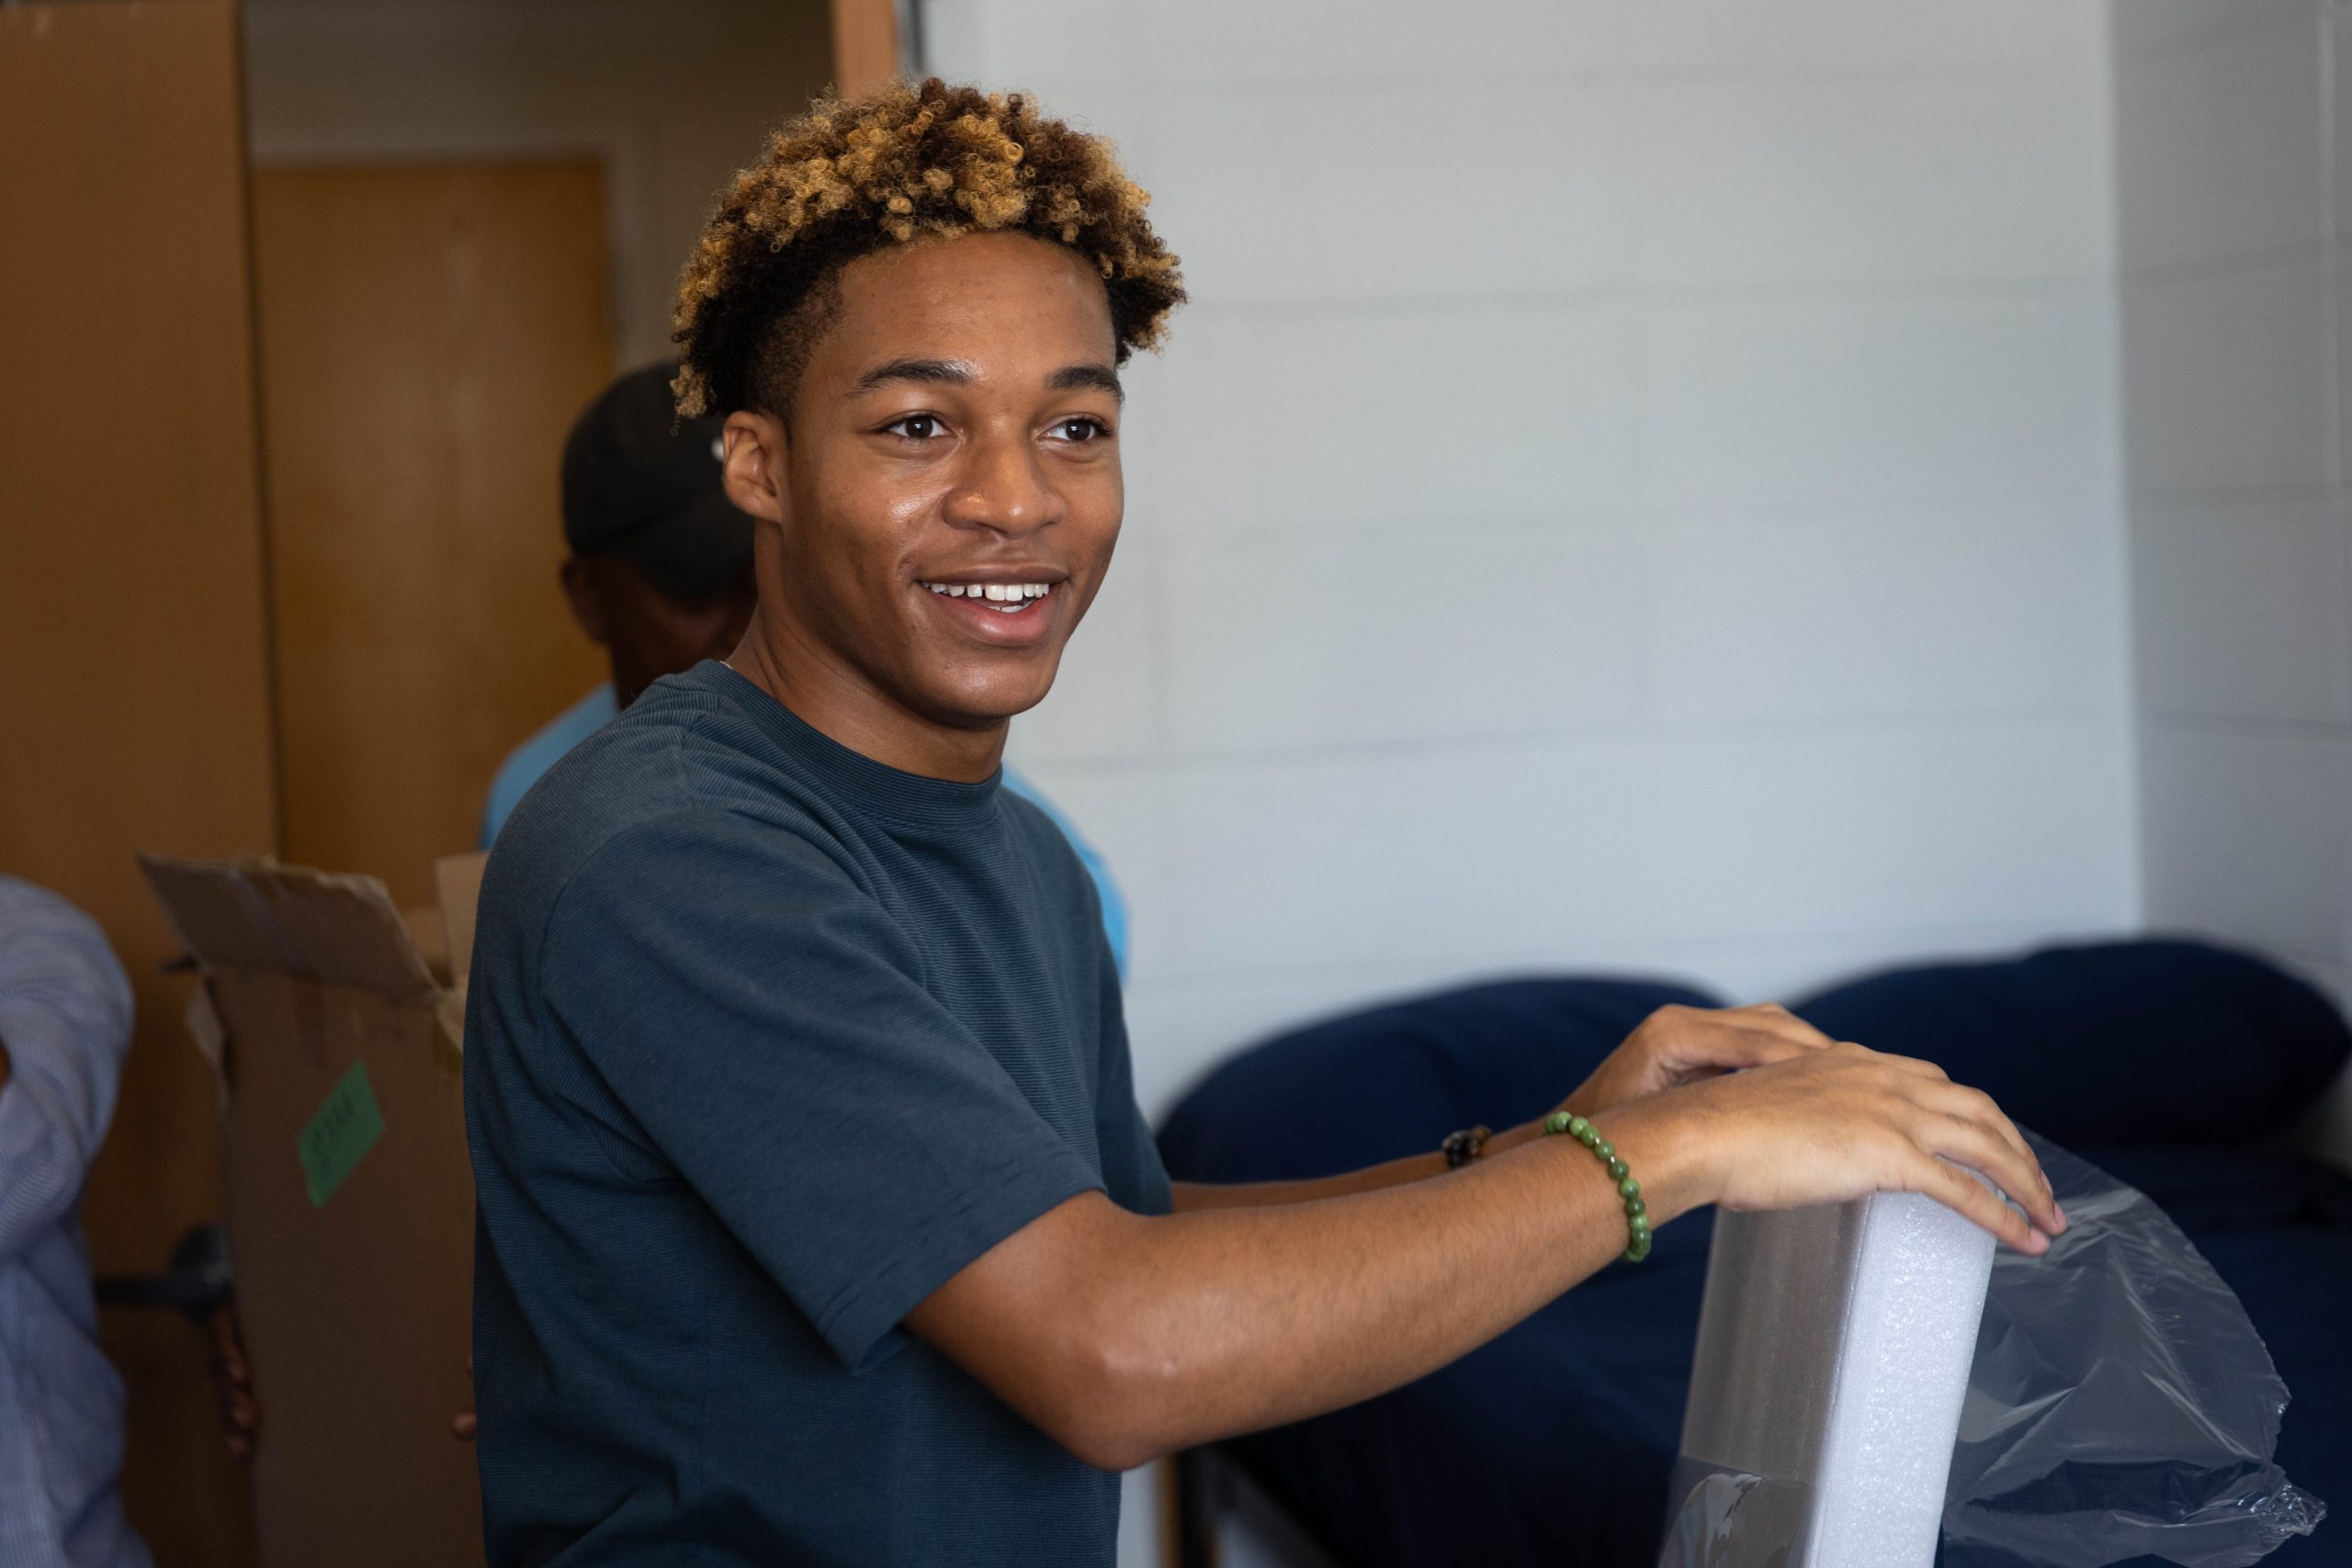 A male student smiles off-camera while unpacking in his dorm room during move-in.